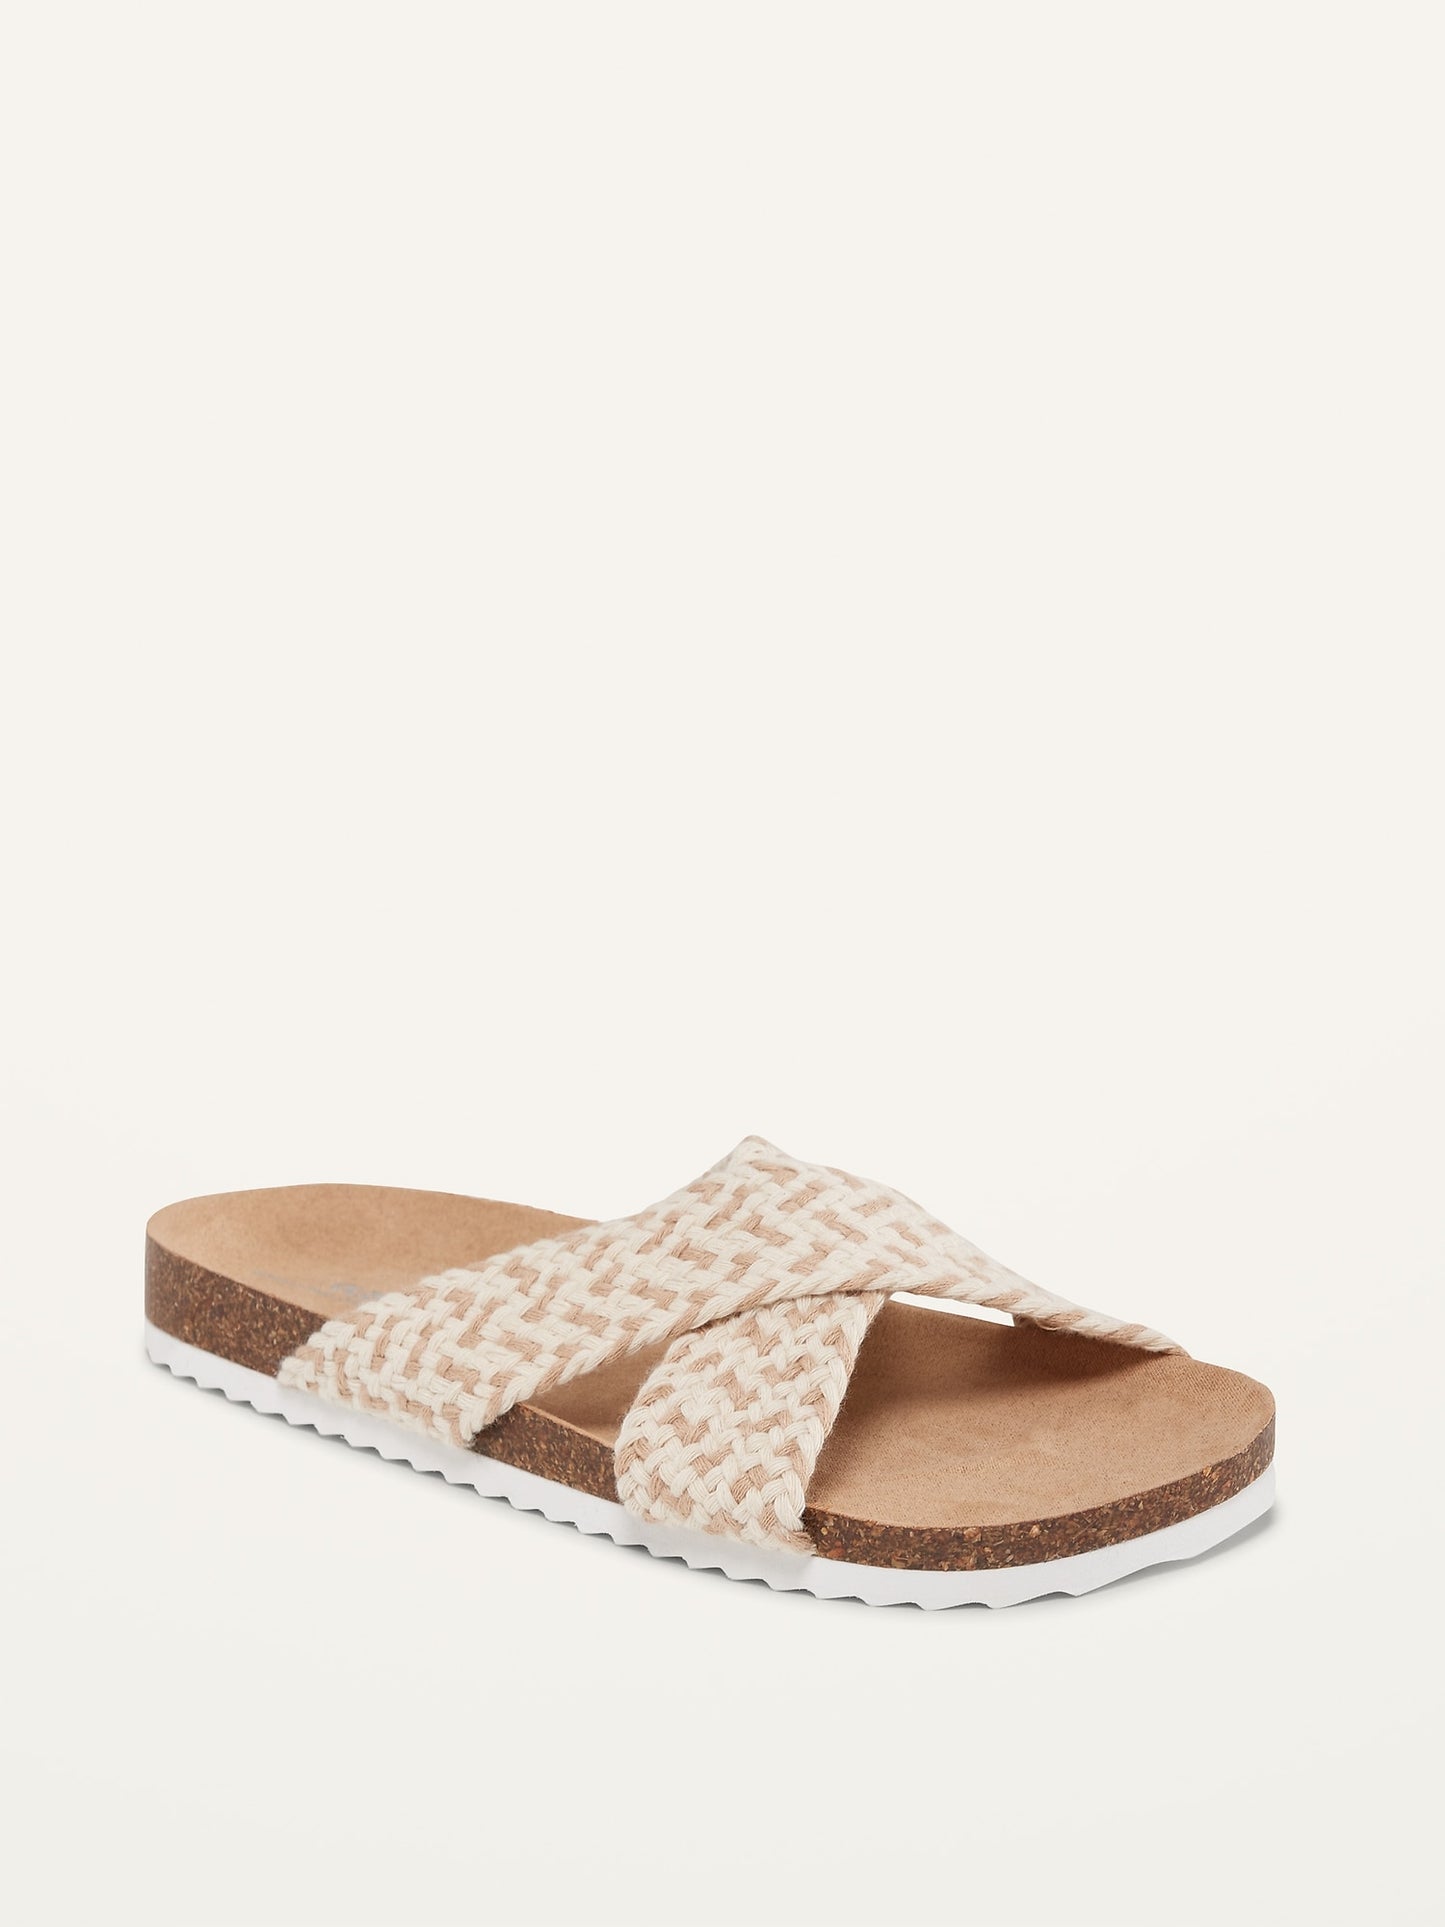 Woven-Textured Criss-Cross Slide Sandals for Girls (Partially Plant-Based) U Crafted Linen Slide Sandal Taupe/Creme